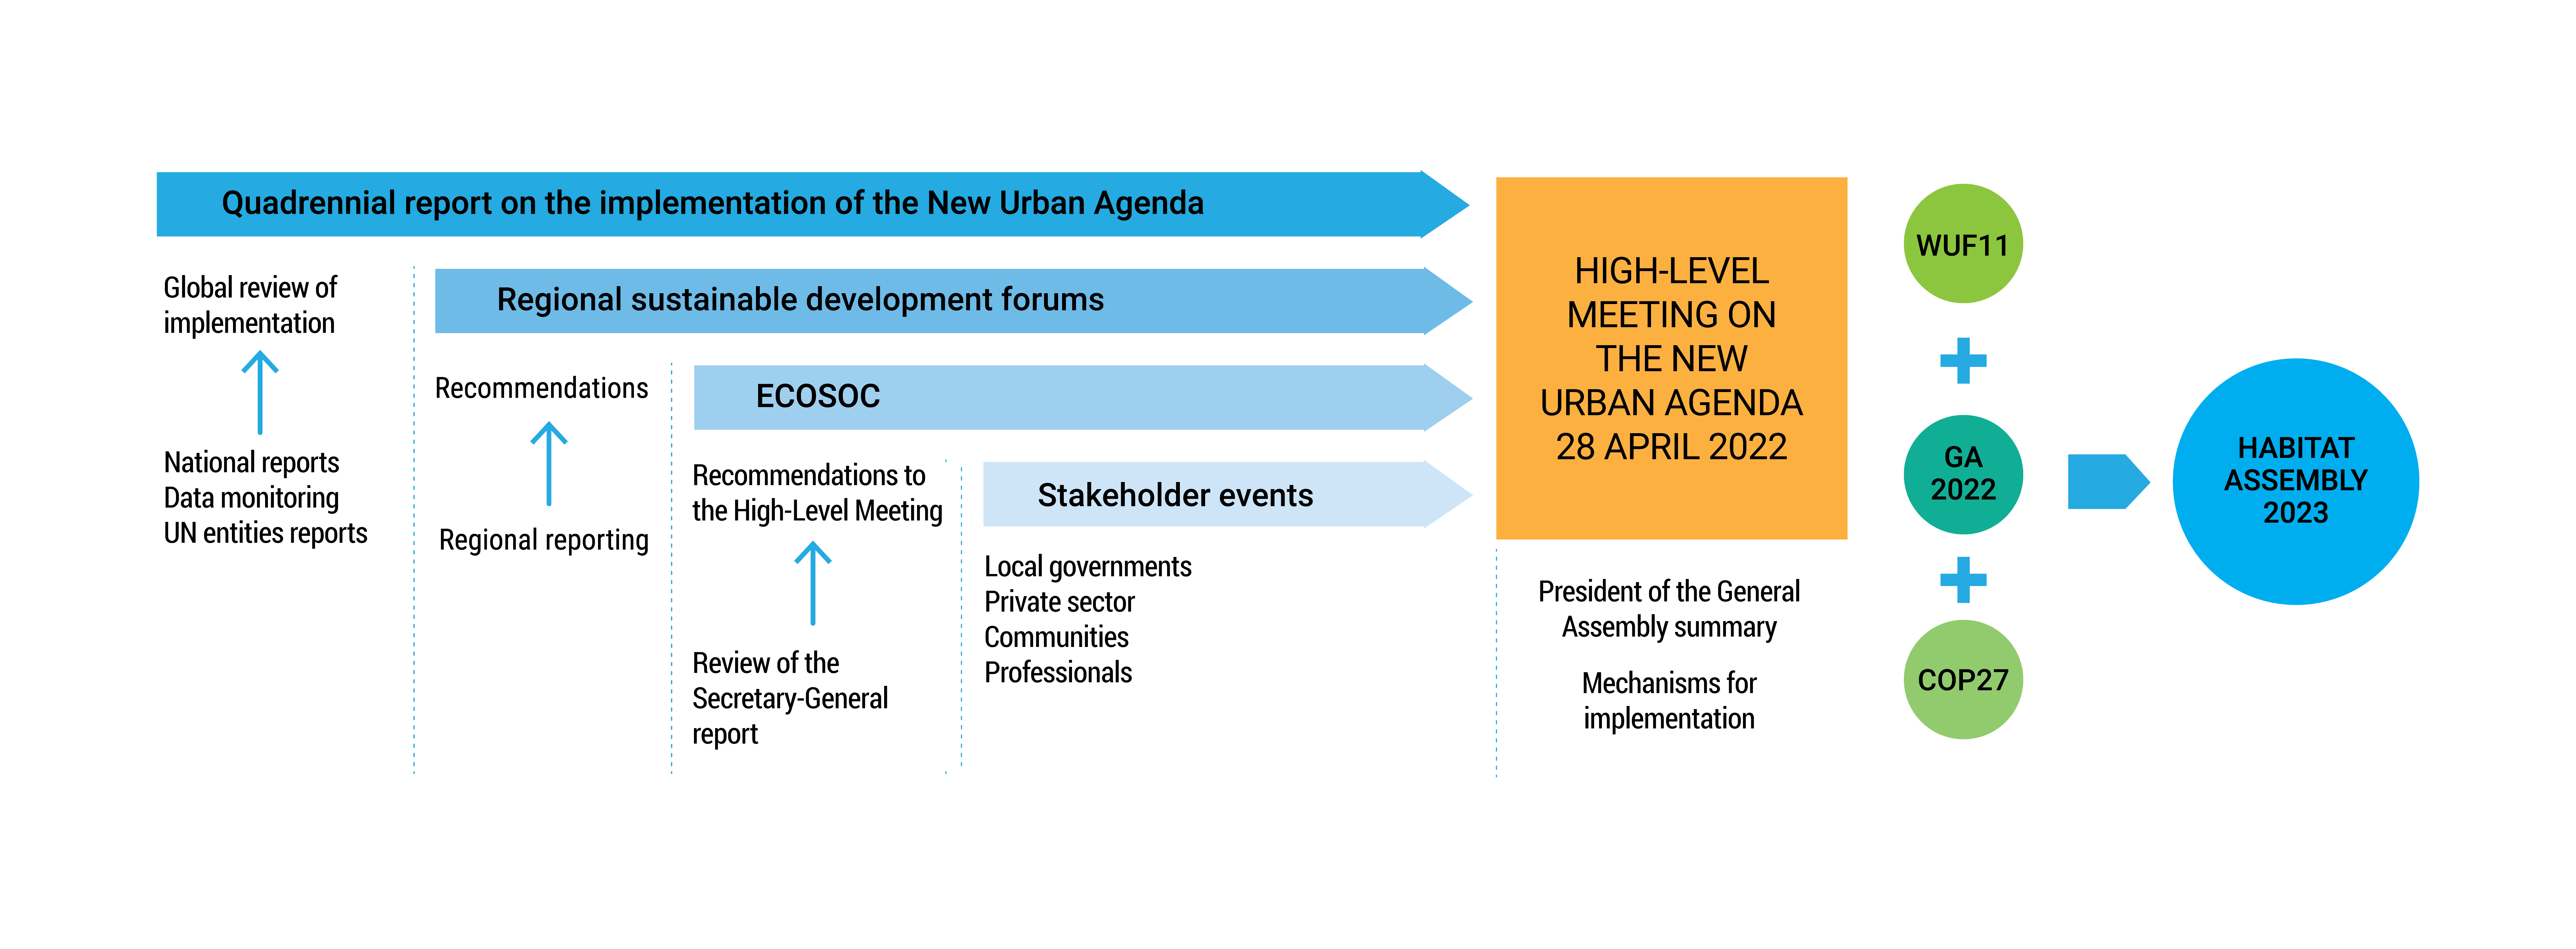 Figure 1: A multipronged process strengthening the New Urban Agenda to accelerate the achievement of the Sustainable Development Goals